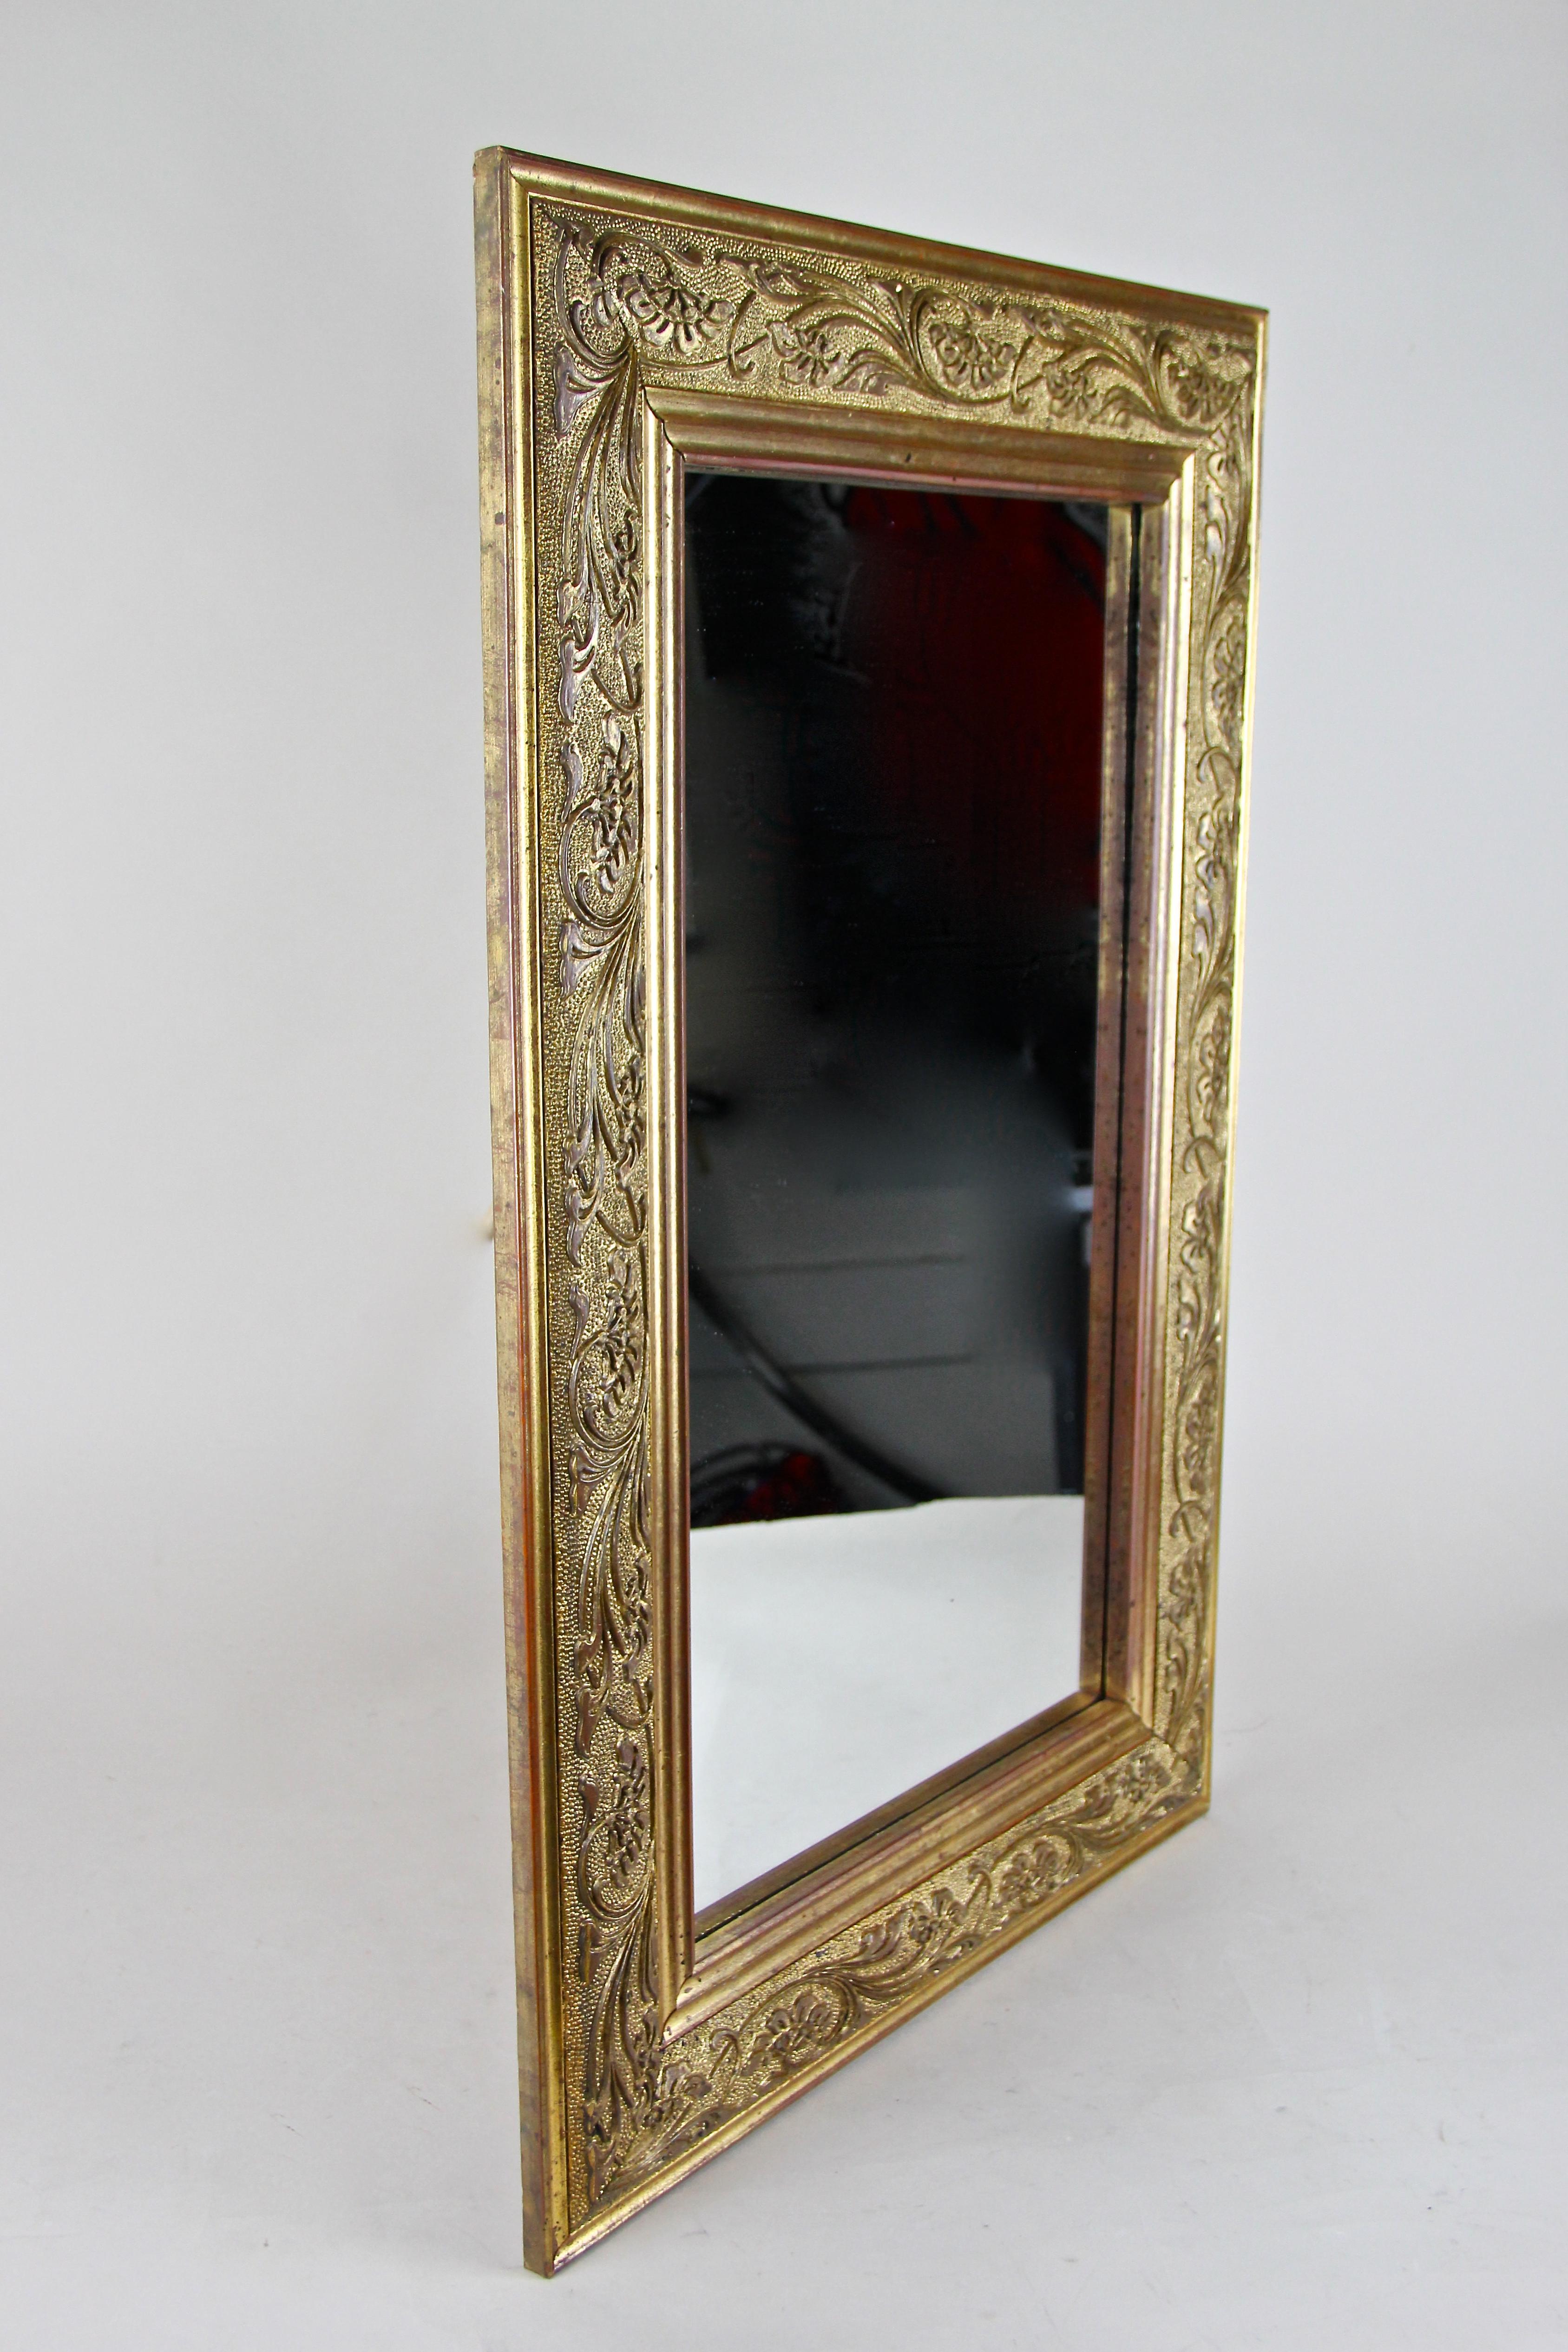 Enchanting golden Art Nouveau wall mirror from the era in Austria around 1900 This mirror impresses with a beautiful designed frame covered with composition gold and adorned by a fantastic stucco work showing delicate flower ranks, an epitome of the